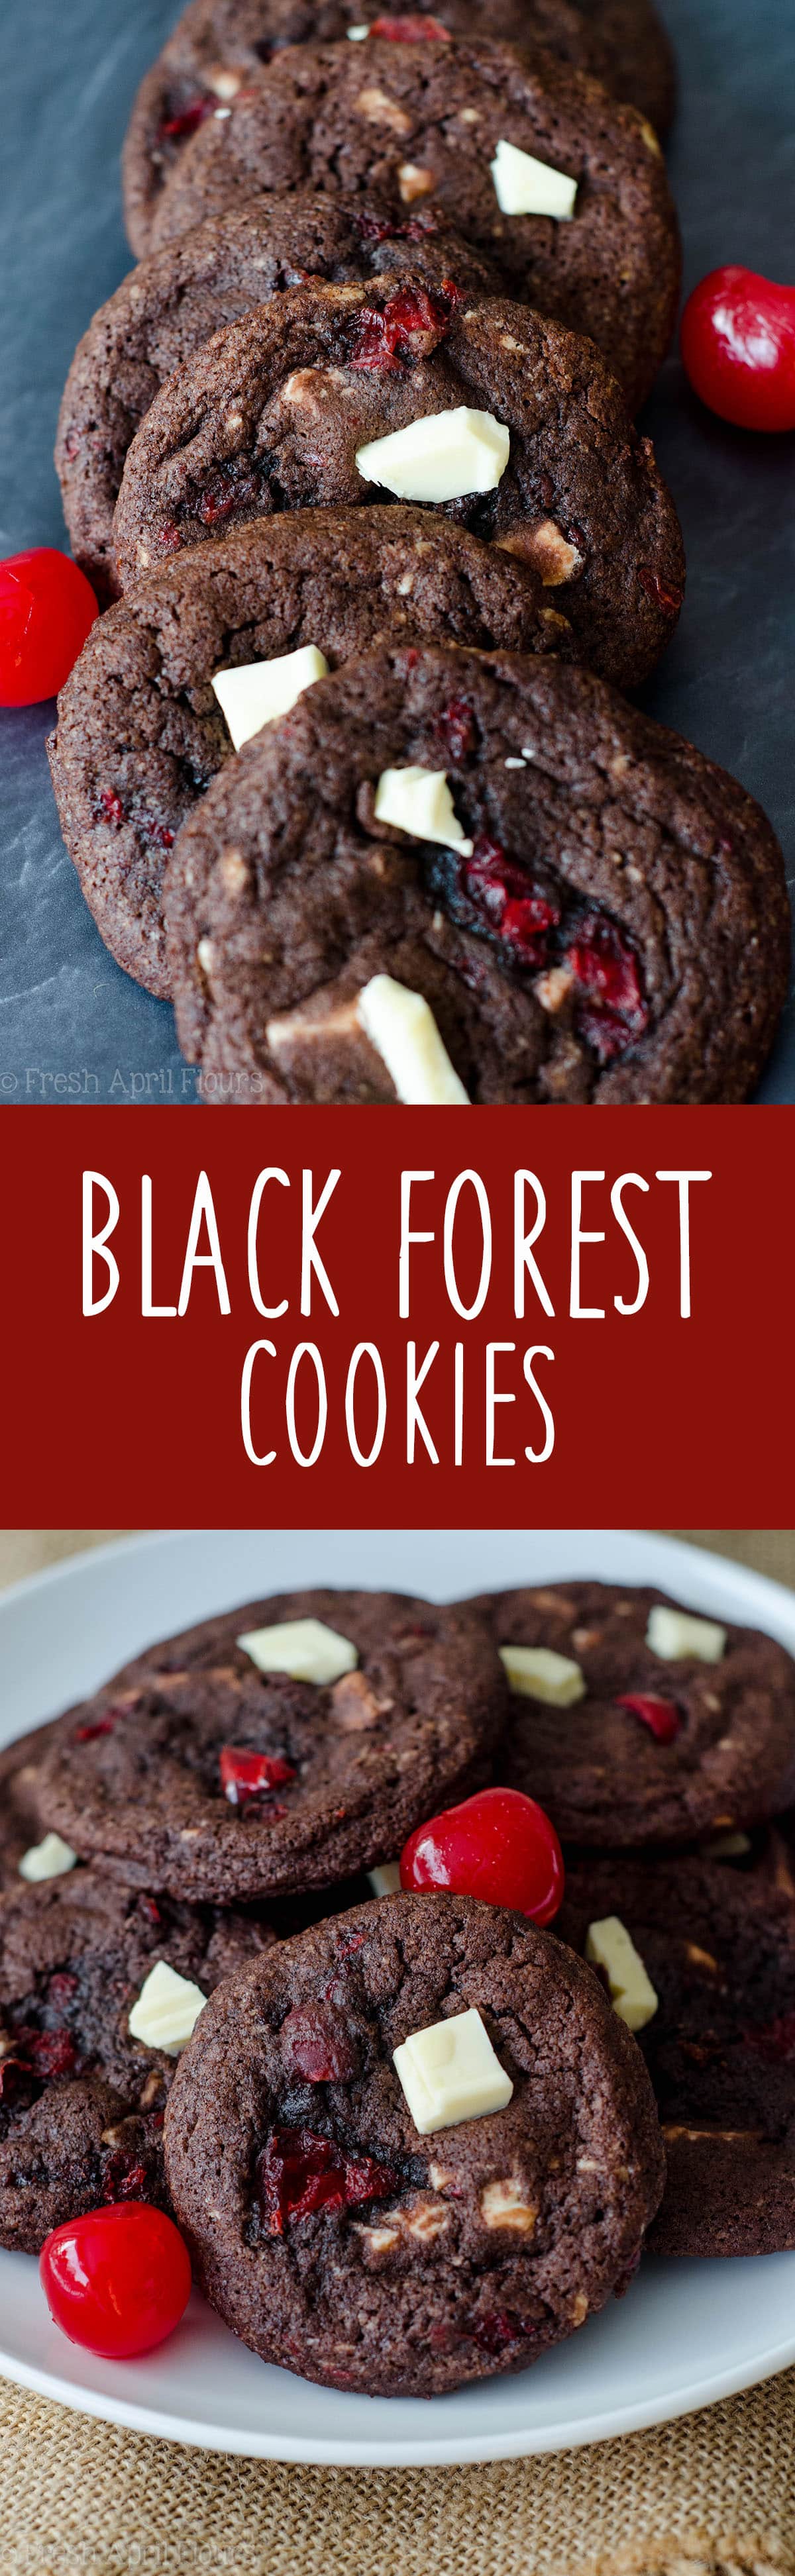 Black Forest Cookies: Soft and chewy chocolate cookies filled with creamy white chocolate chunks and sweet maraschino cherry pieces. via @frshaprilflours